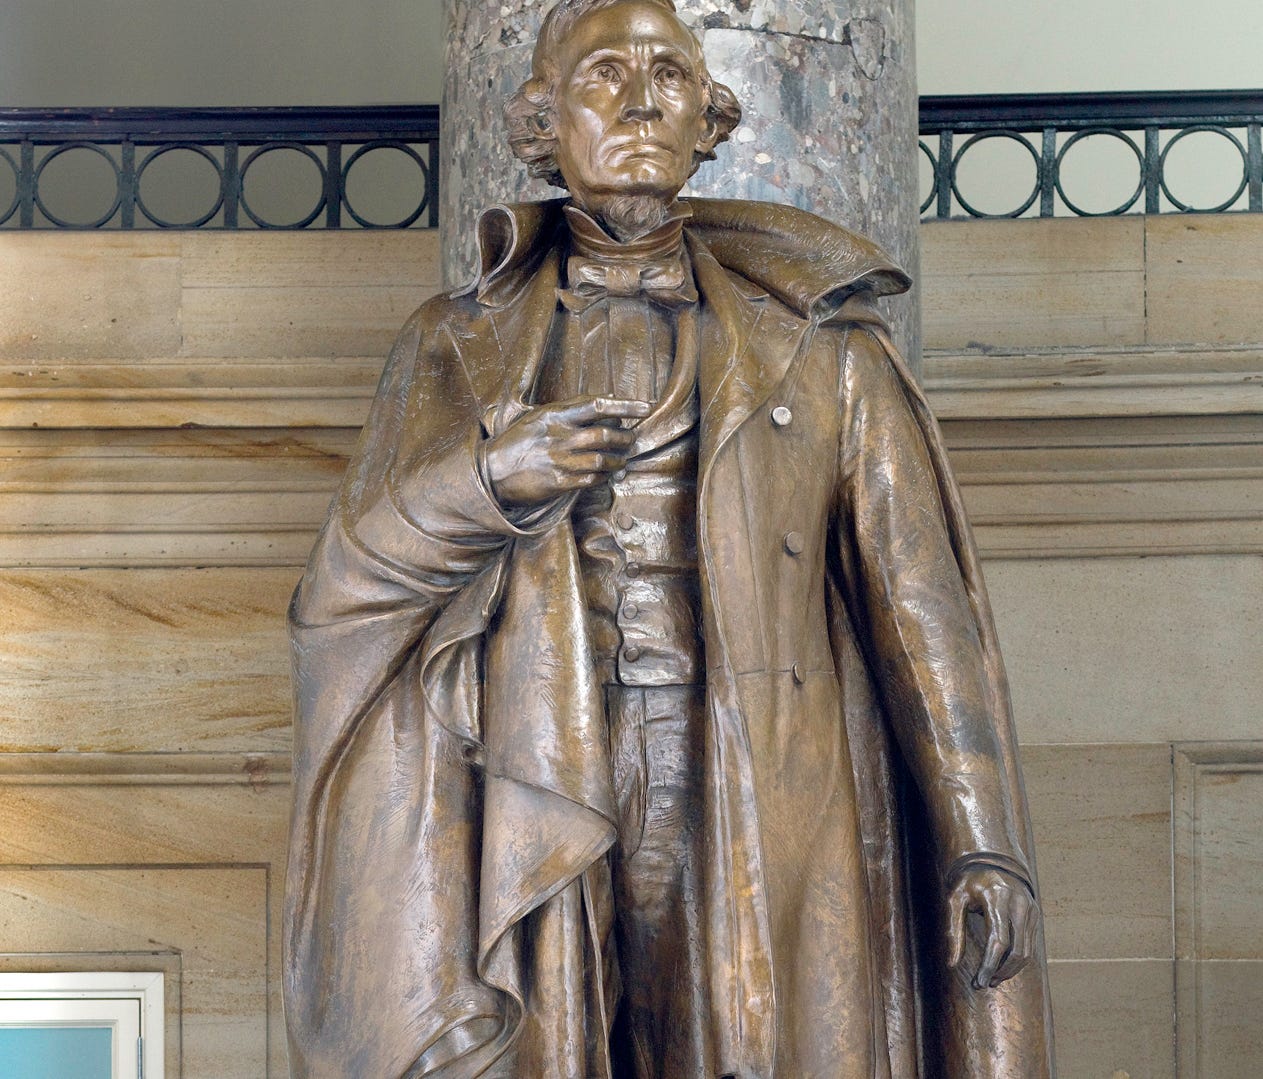 This statue of Jefferson Davis, the president of the Confederate States of America, is one of two chosen in the 1930s to be featured in the U.S. Capitol as representing the state of Mississippi.